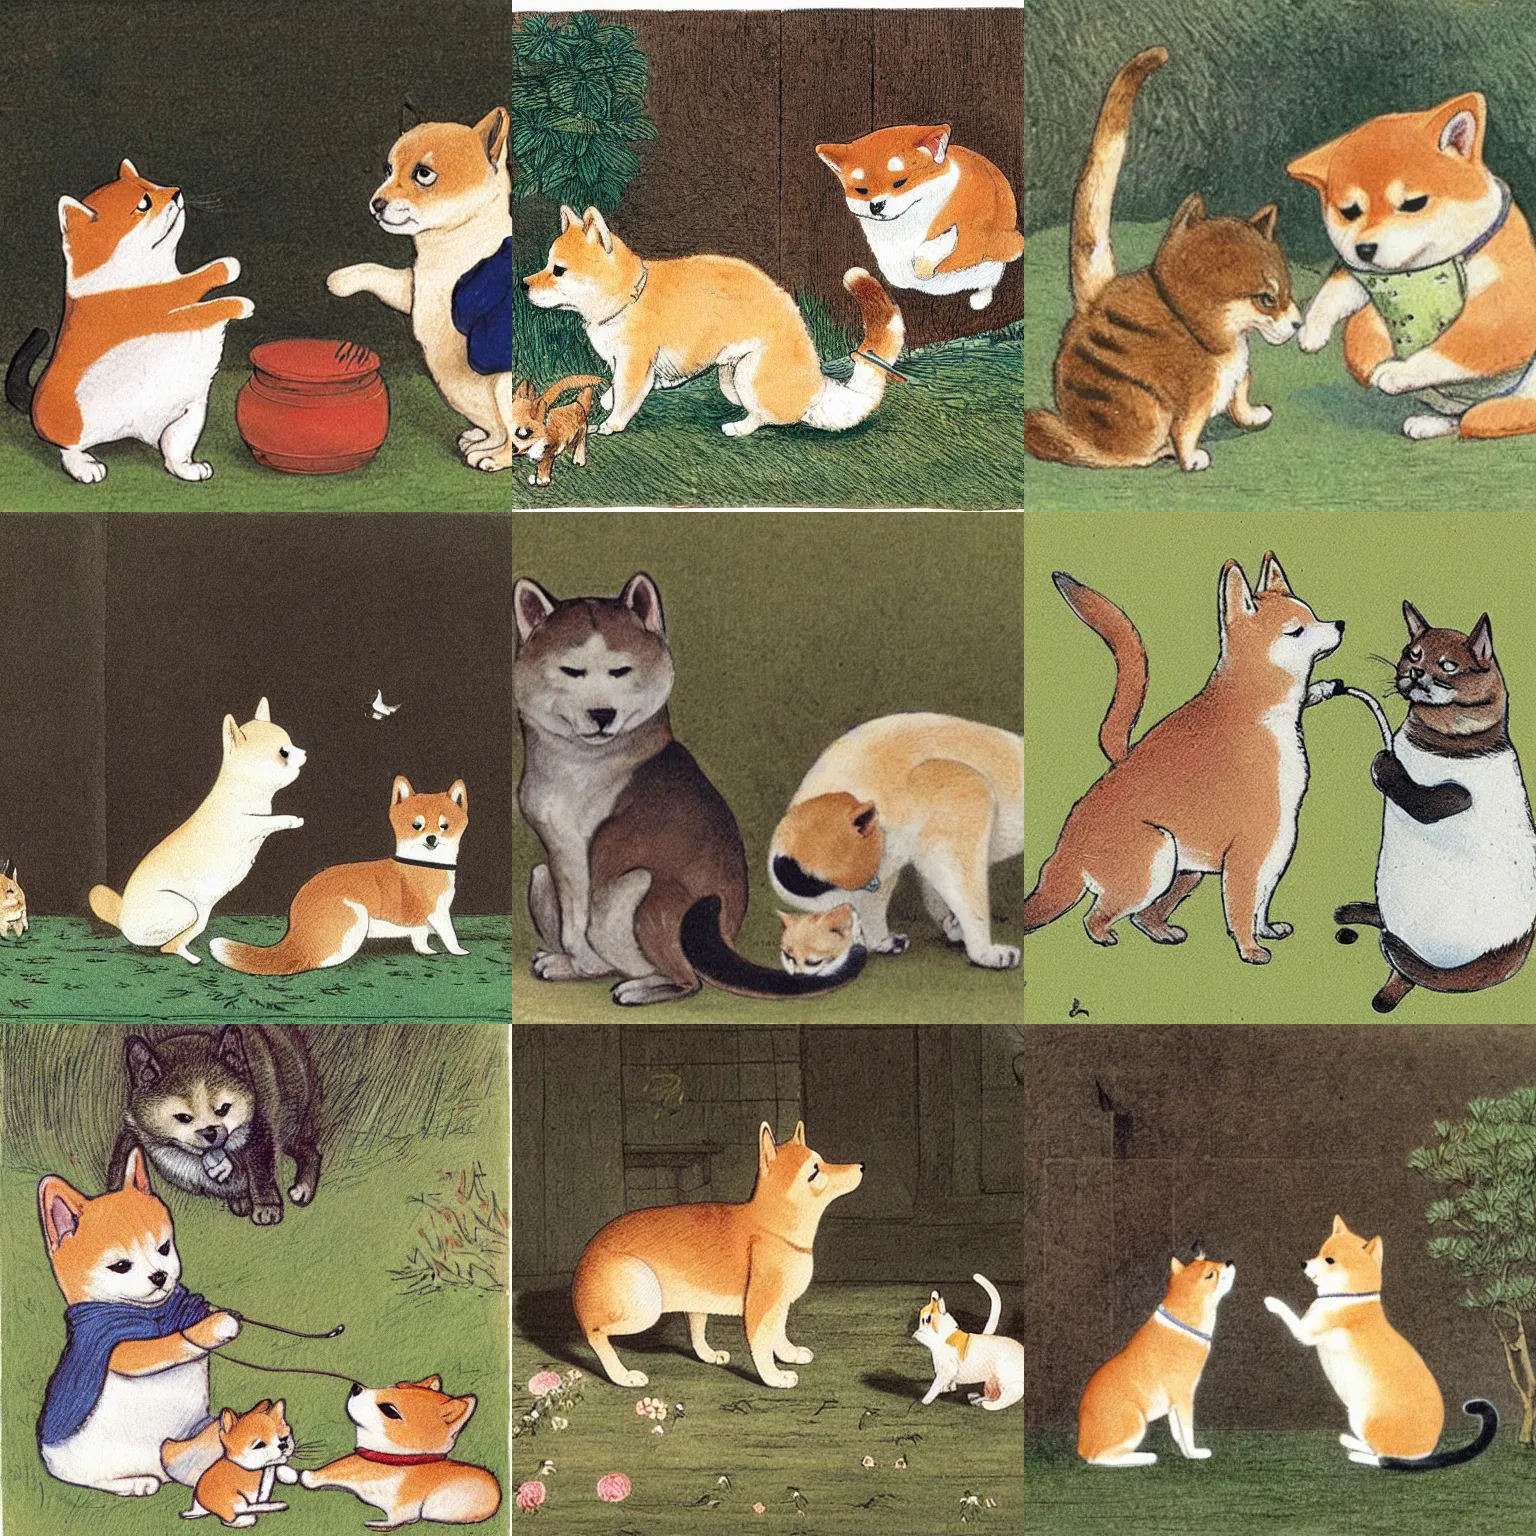 Prompt: A Shiba Inu and a cat playing together, illustration by Beatrix Potter